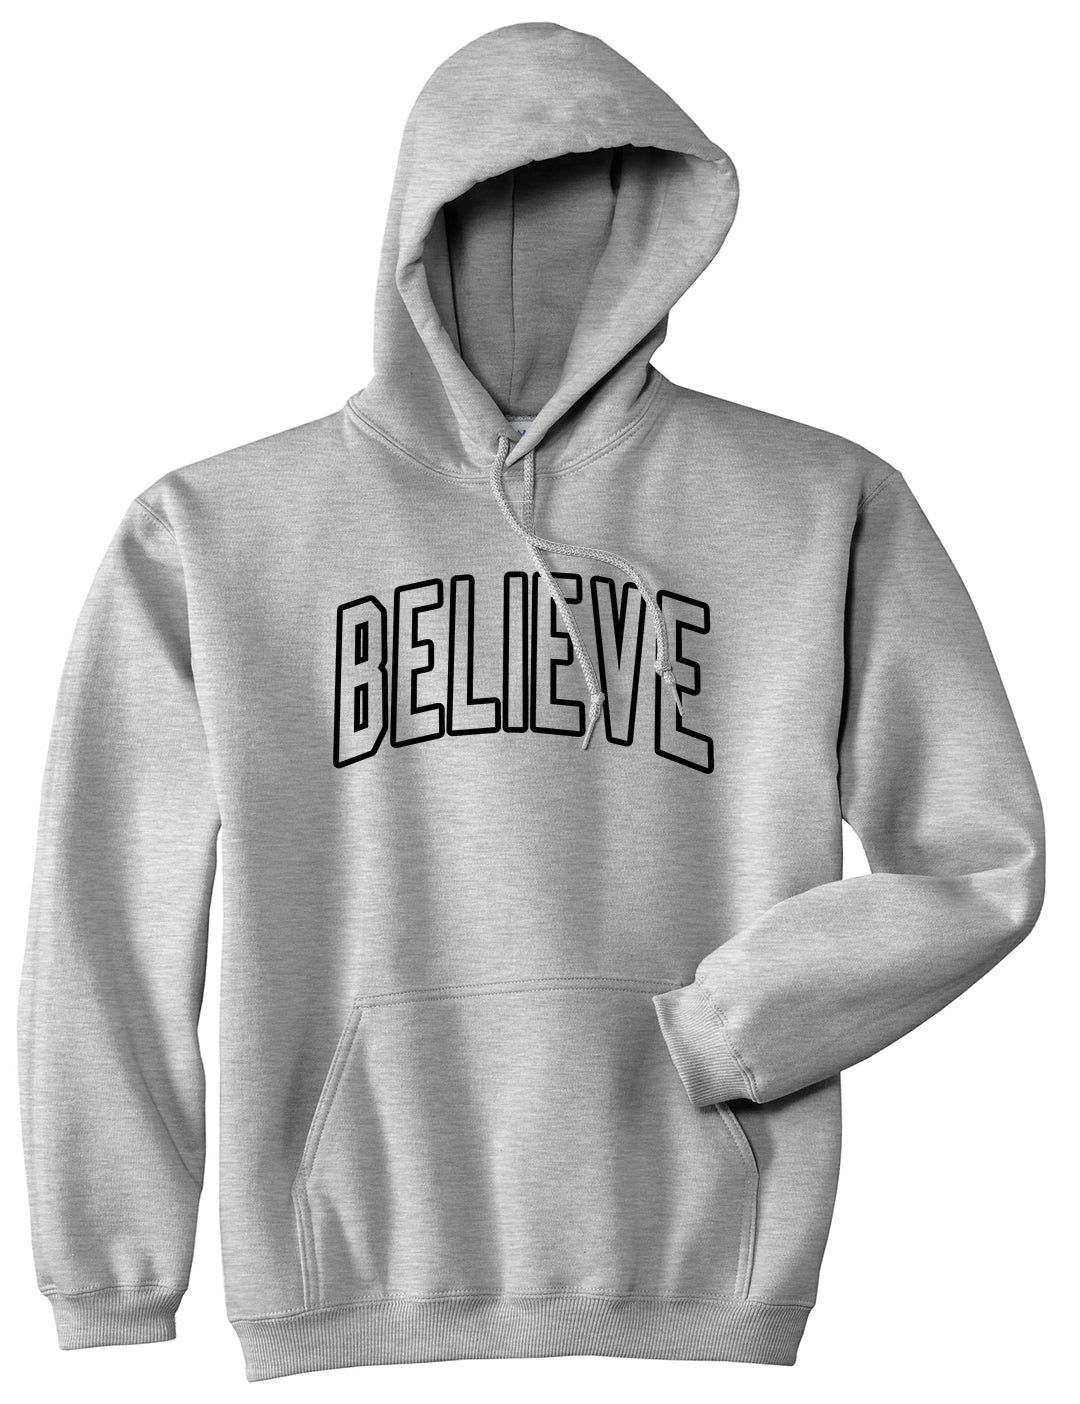 Believe Outline Mens Pullover Hoodie Grey by Kings Of NY